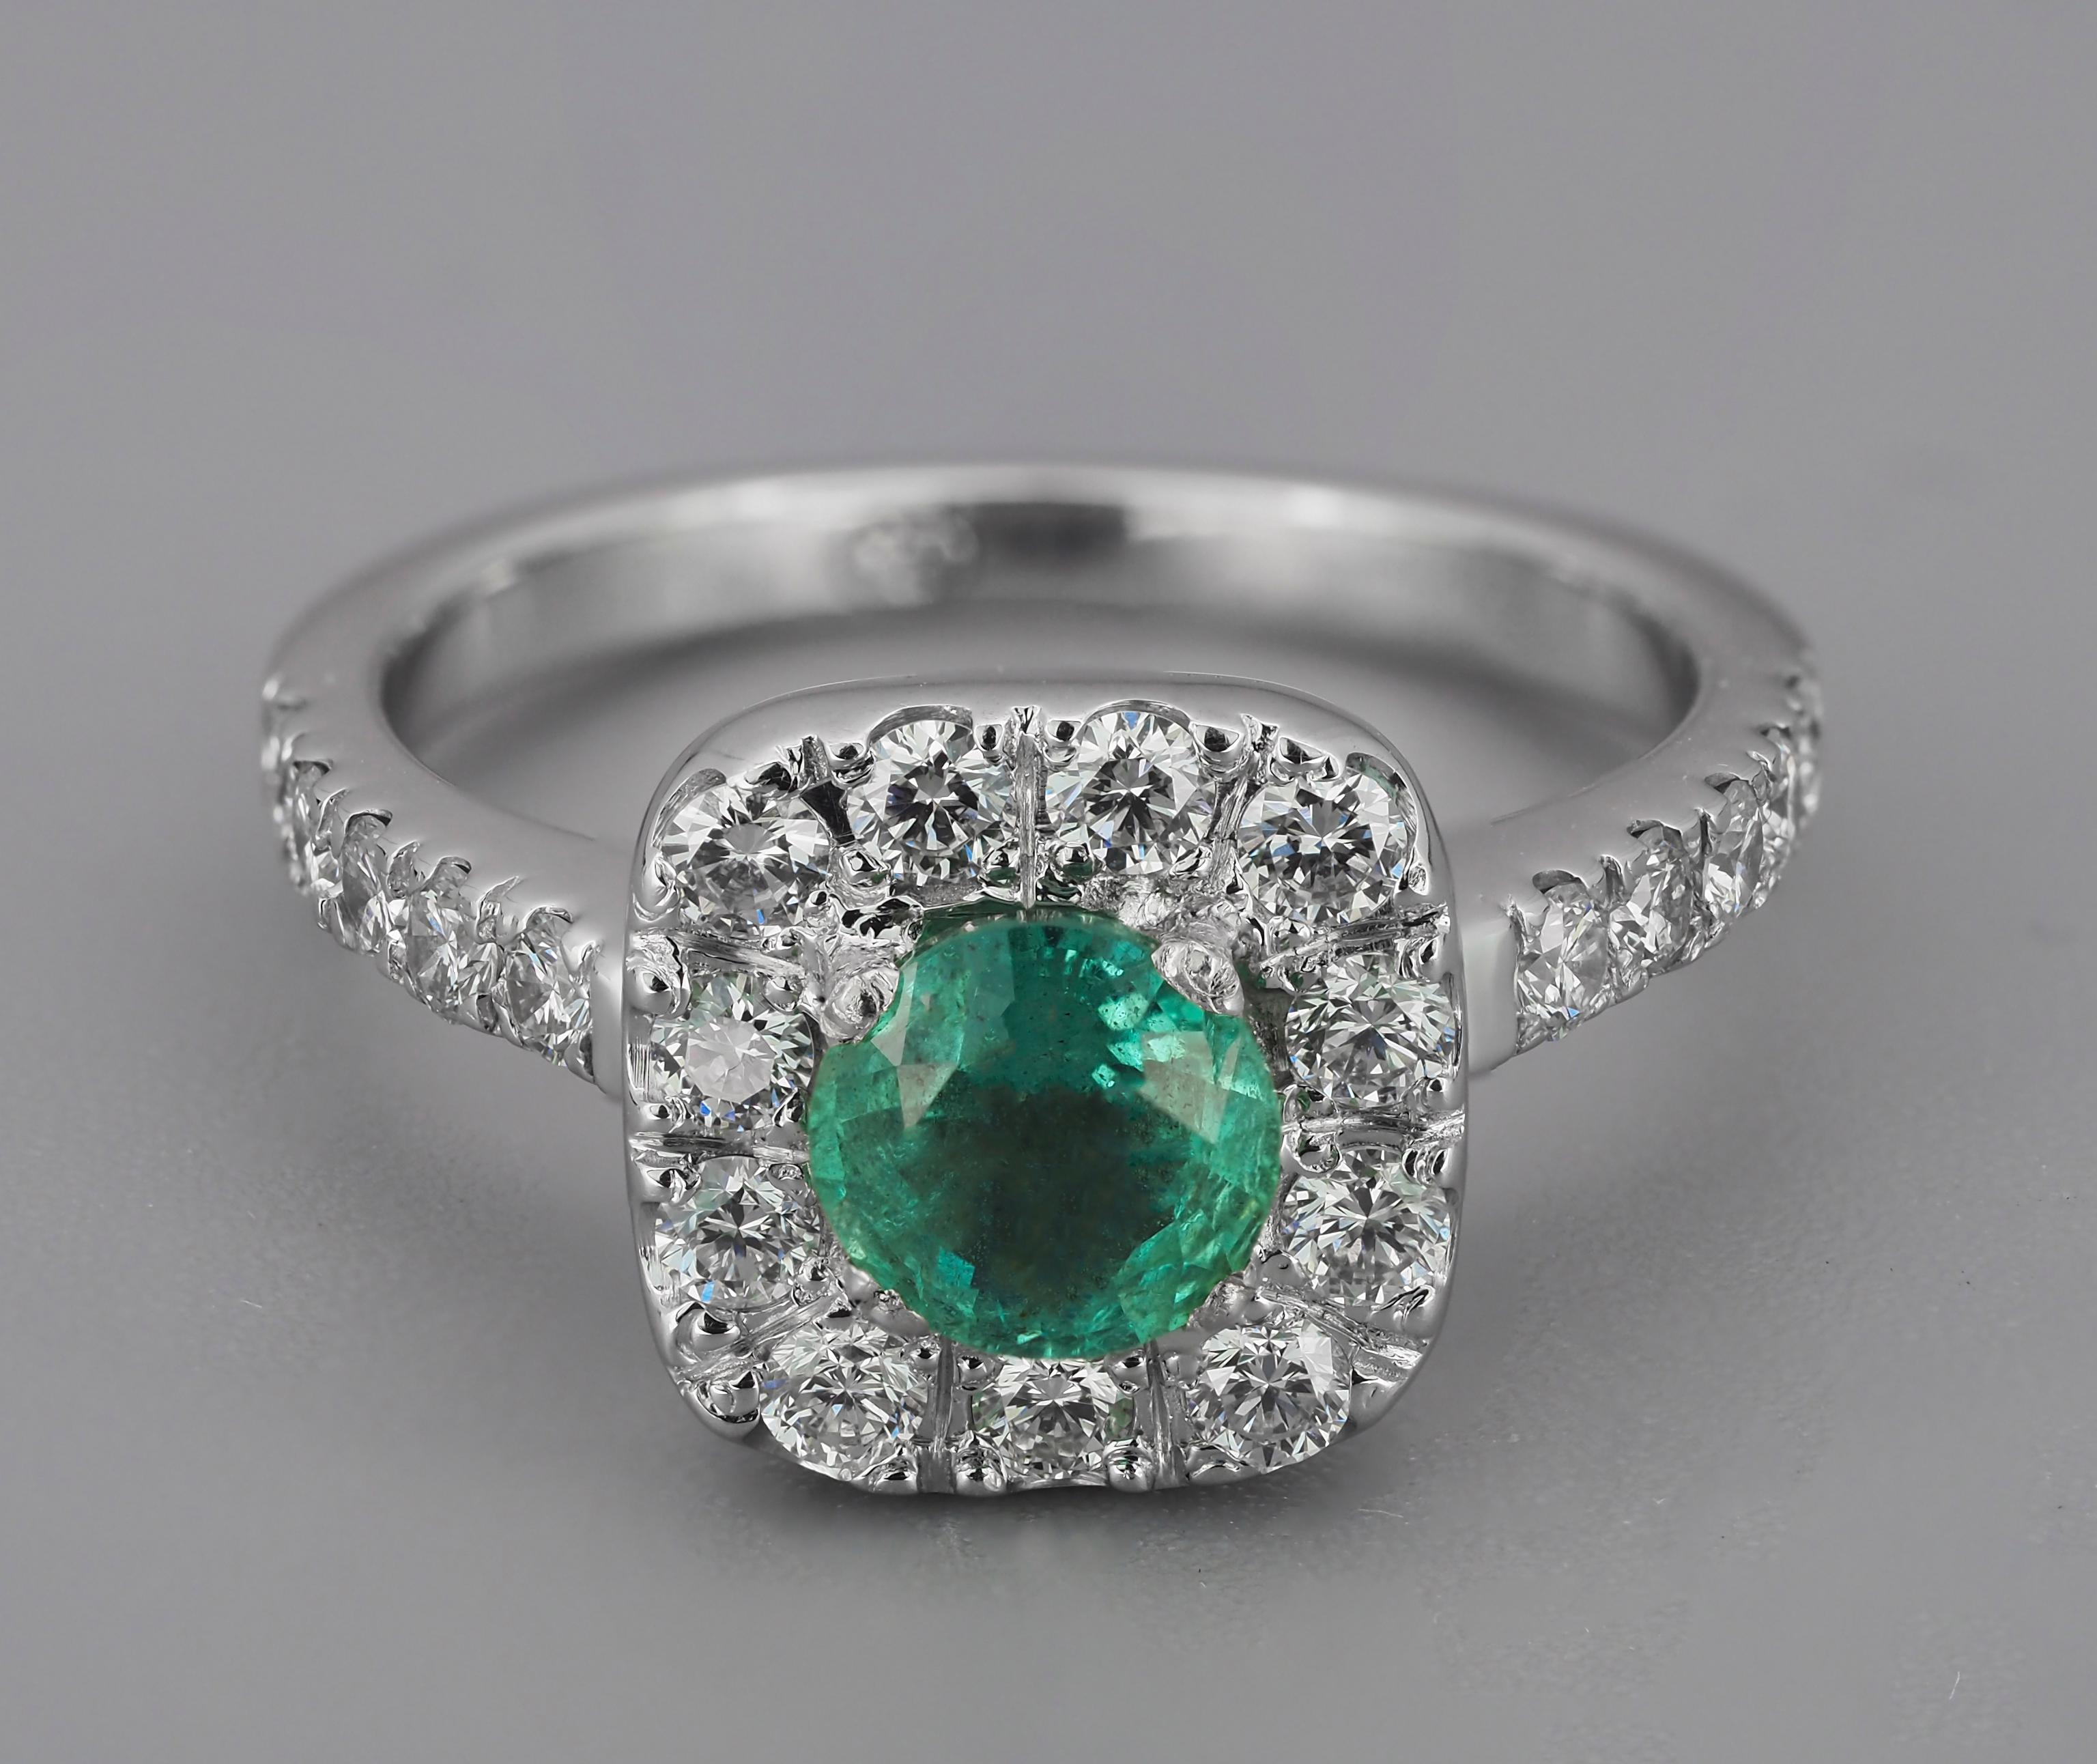 For Sale:  Emerald and Diamonds 14k Gold Ring, Vintage Style Emerald and Diamonds Ring 2